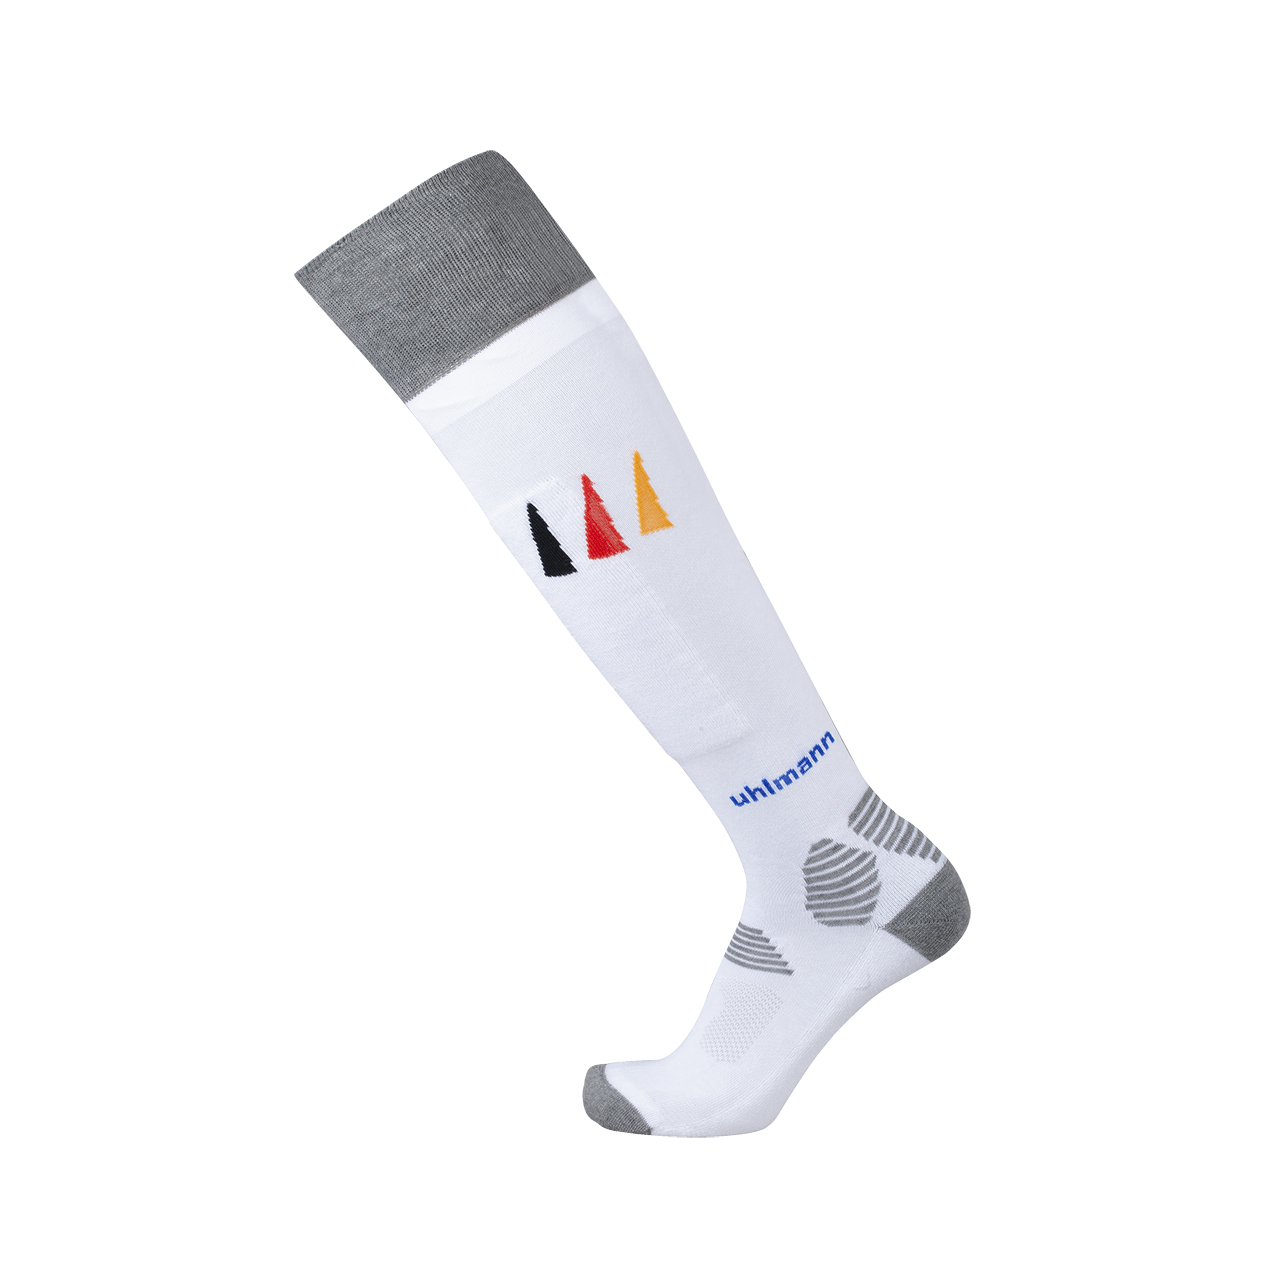 fencing socks "Extra" - with German logo